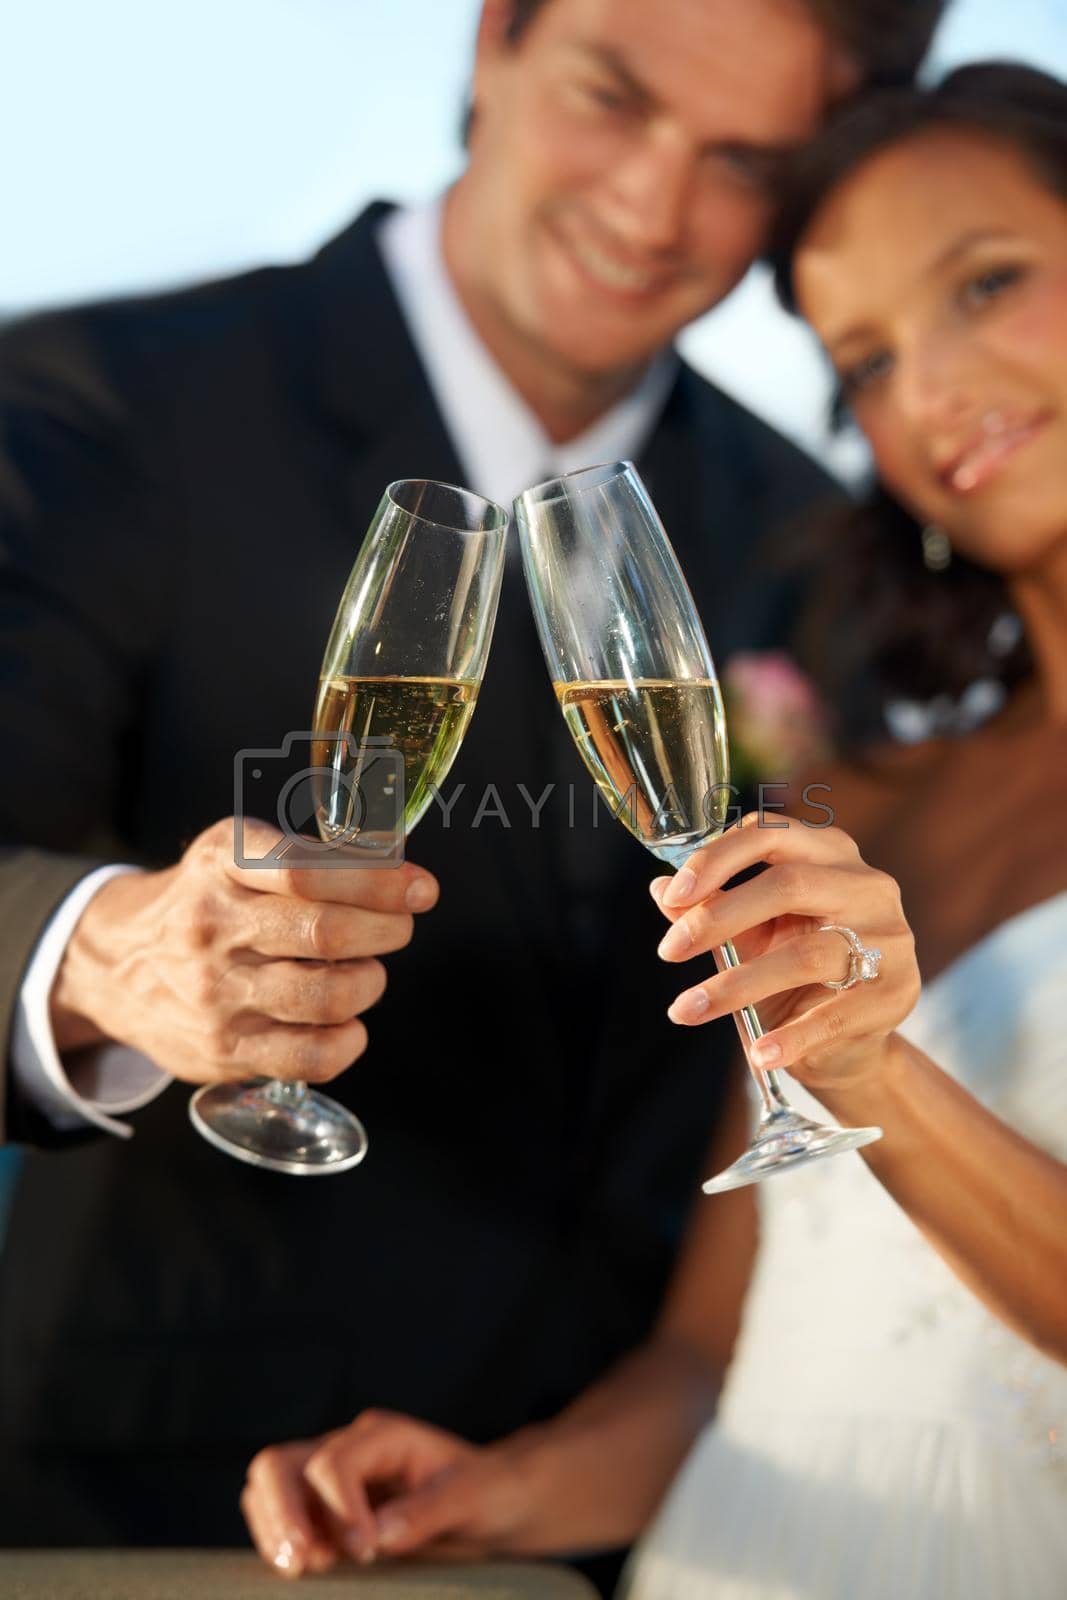 Royalty free image of Heres to us. Cropped view of a young bride and groom standing together and toasting their marriage. by YuriArcurs